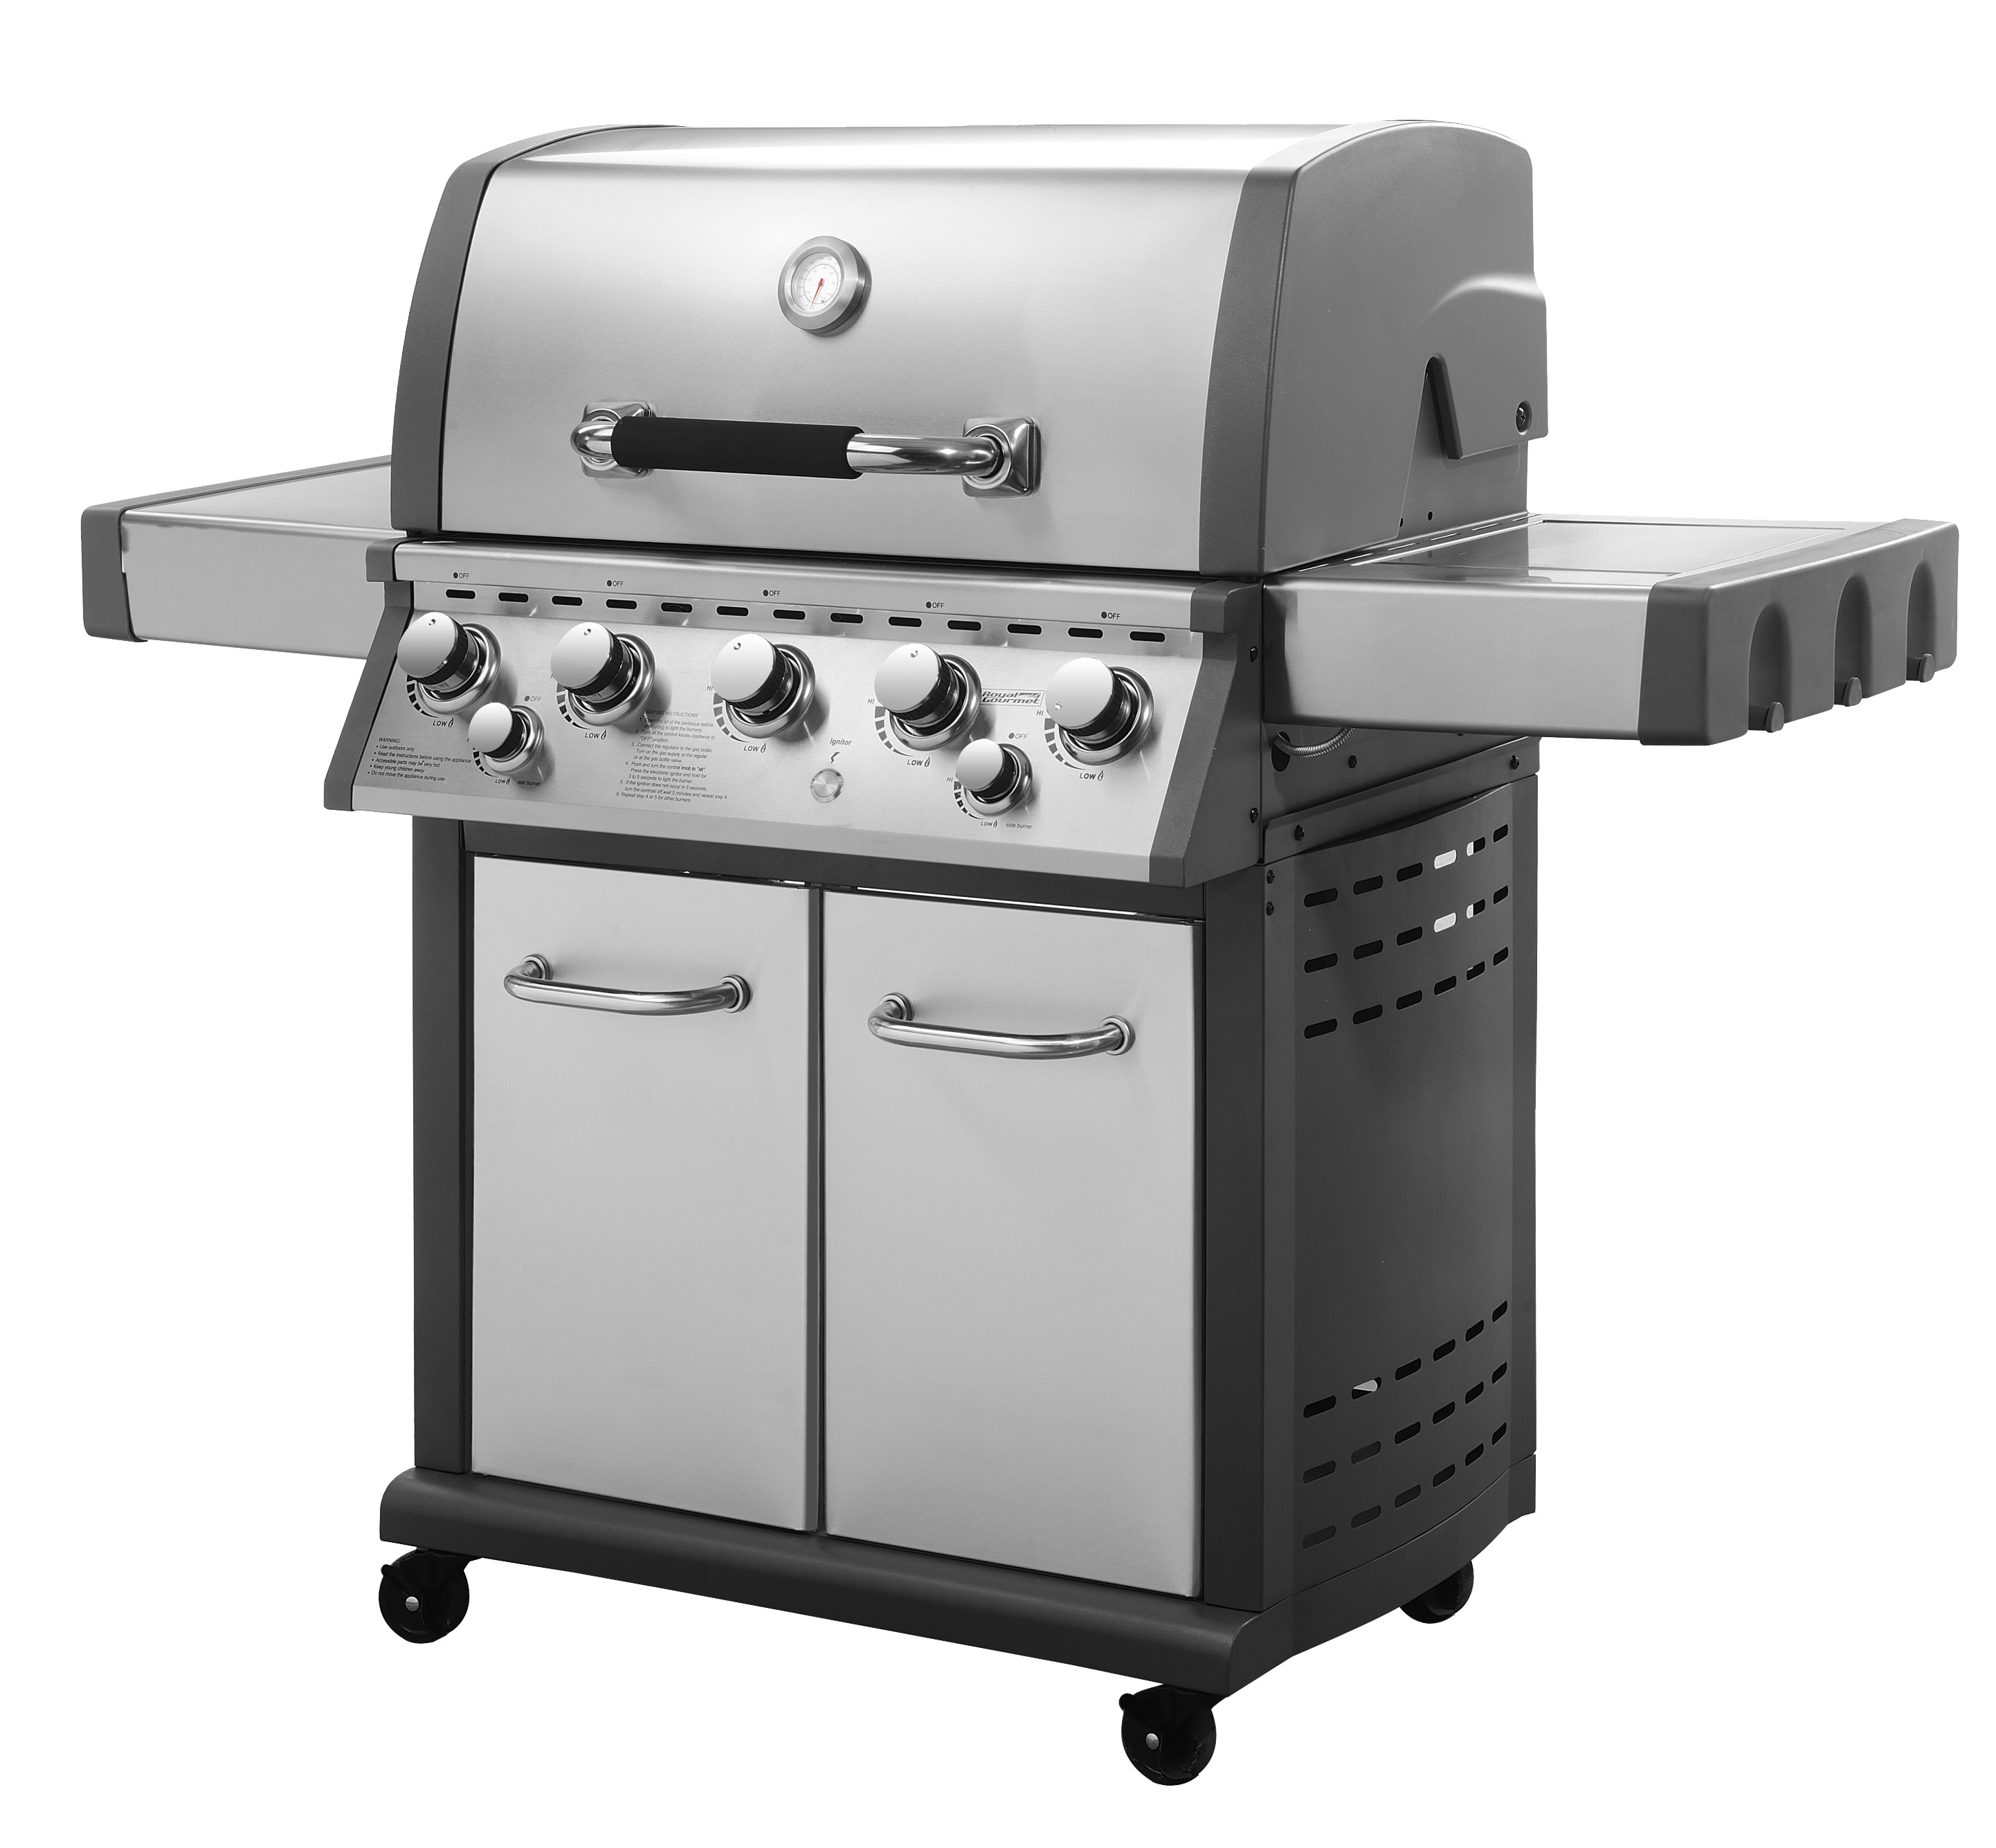 Gas Barbeque Premium INOX with 5 Burners +1 infrarerd and a side cob Unimac